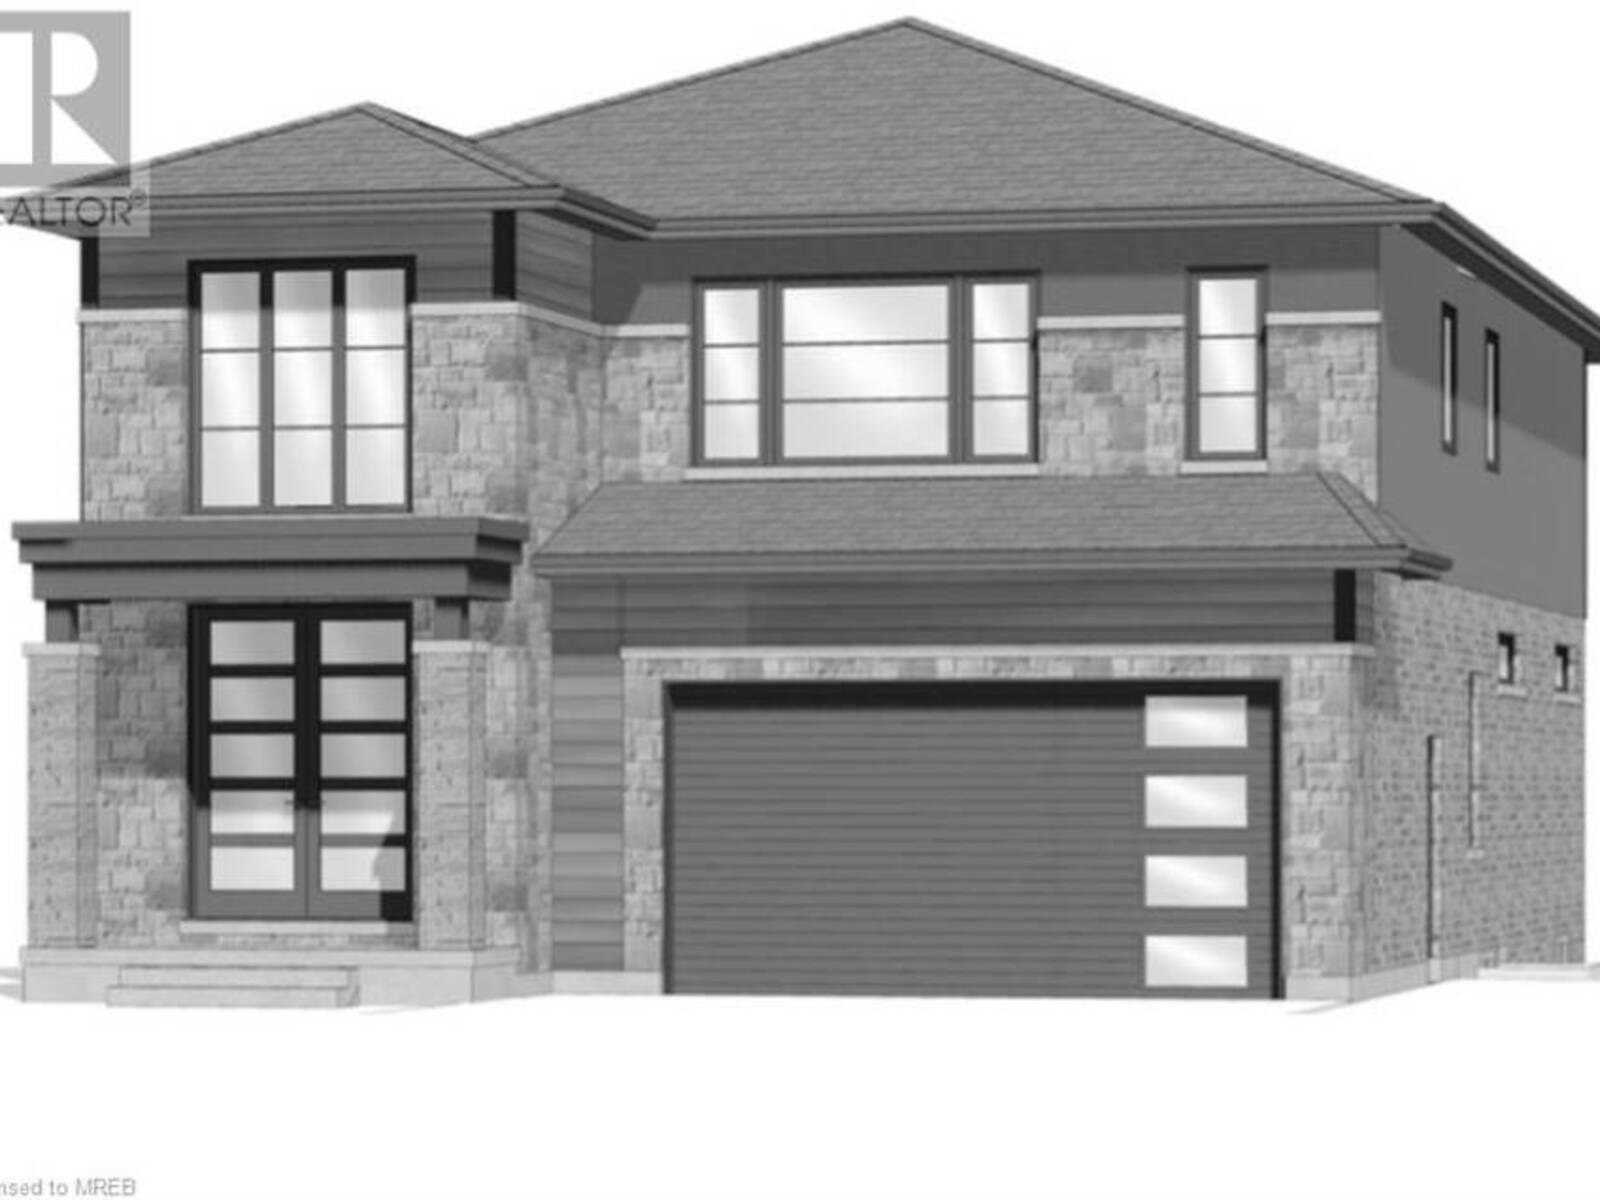 LOT 21 ANCHOR Road, Thorold, Ontario L0S 1A0